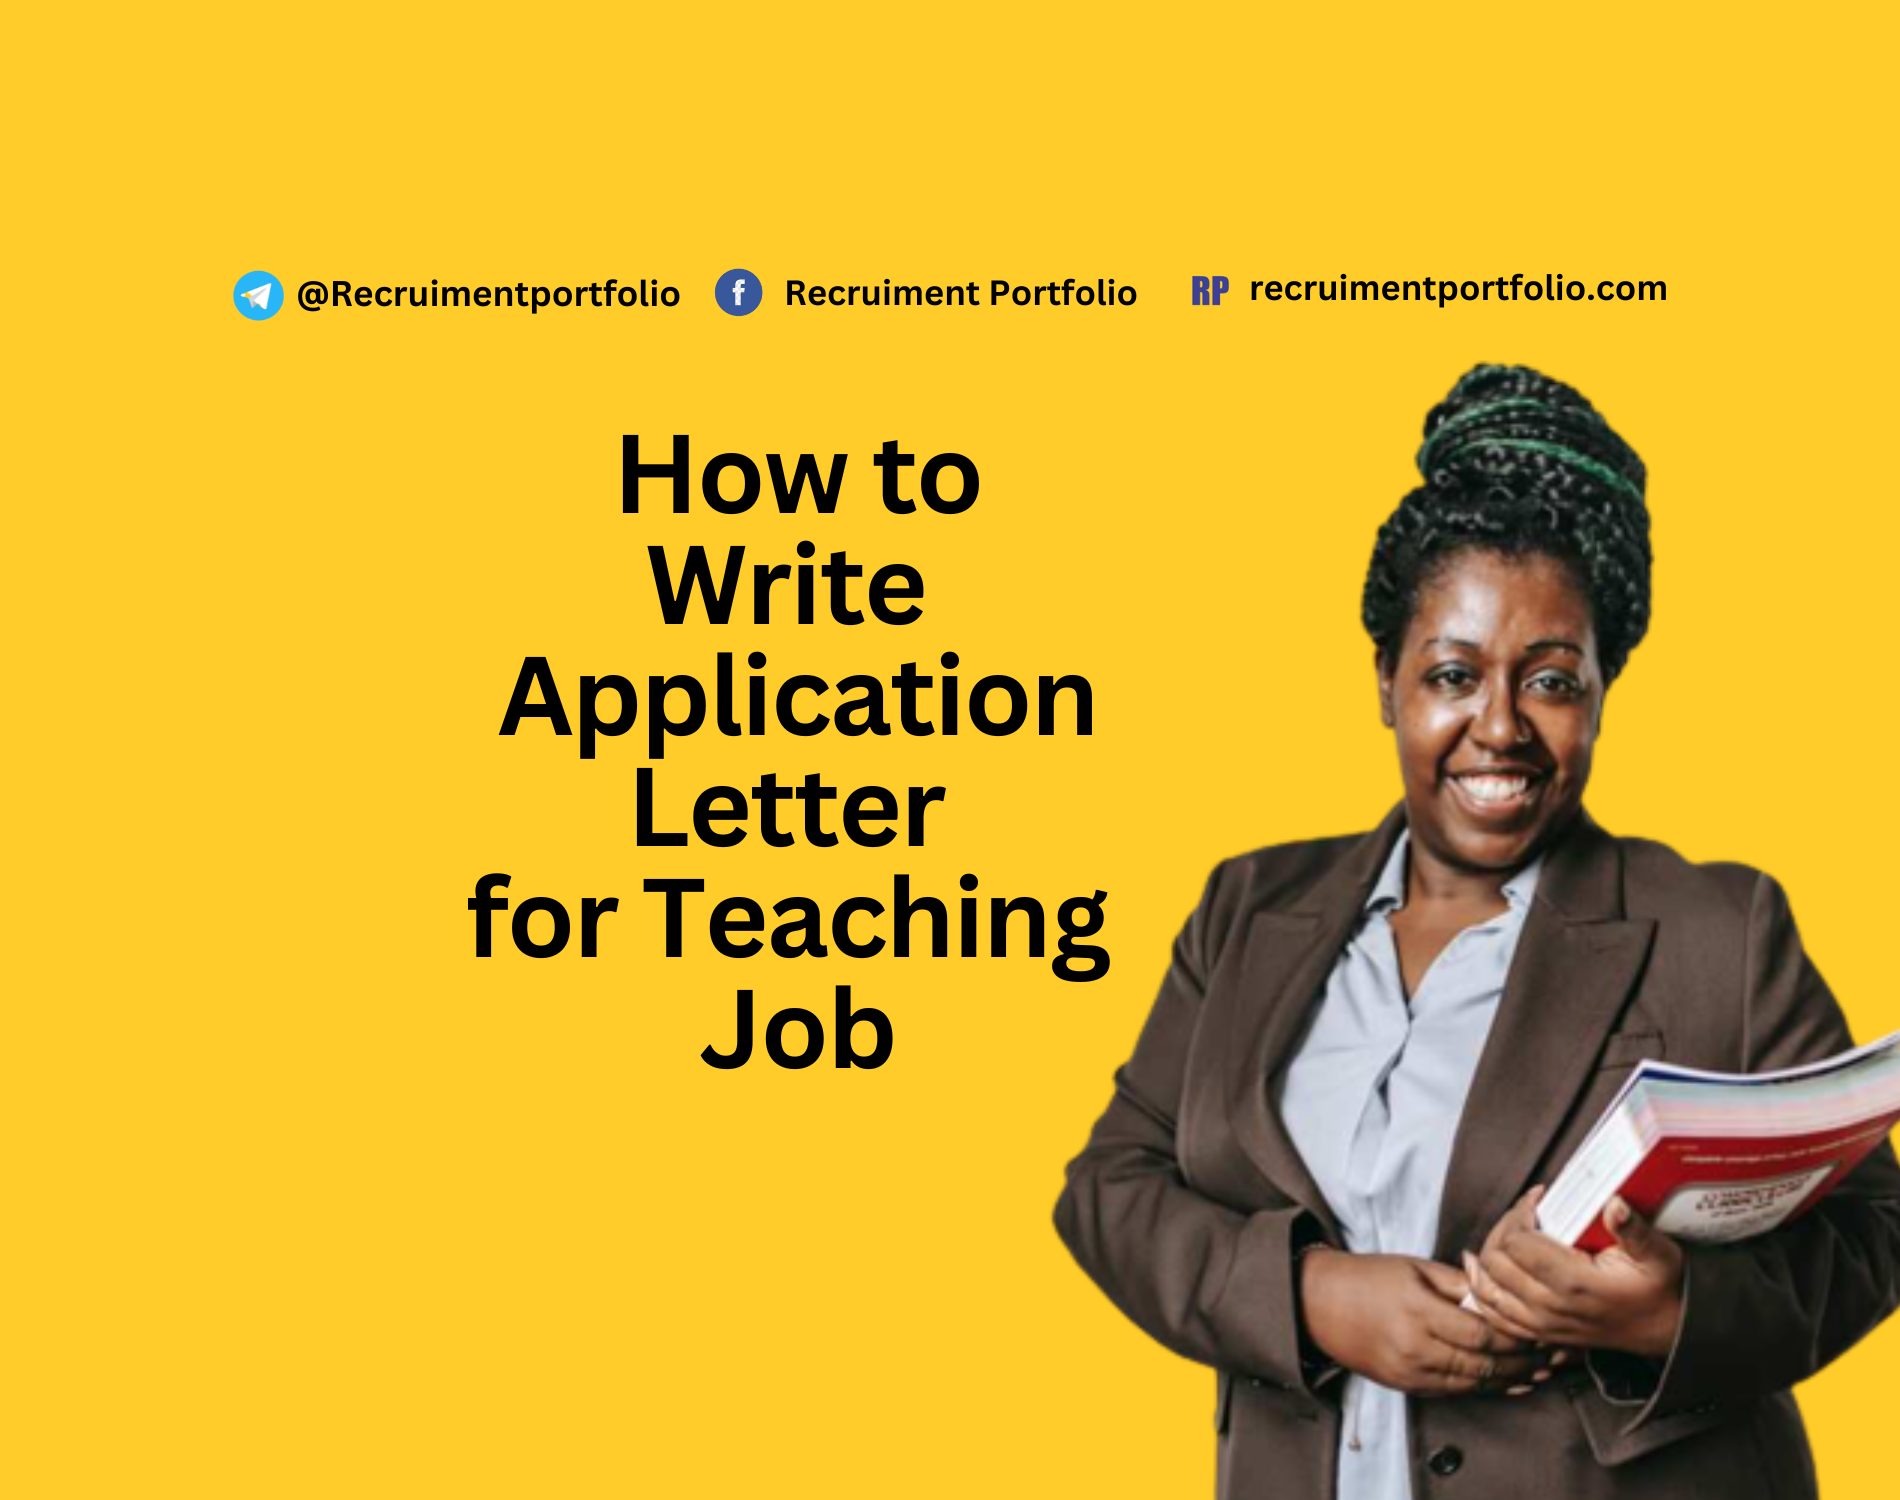 How to Write Application Letter for Teaching Job